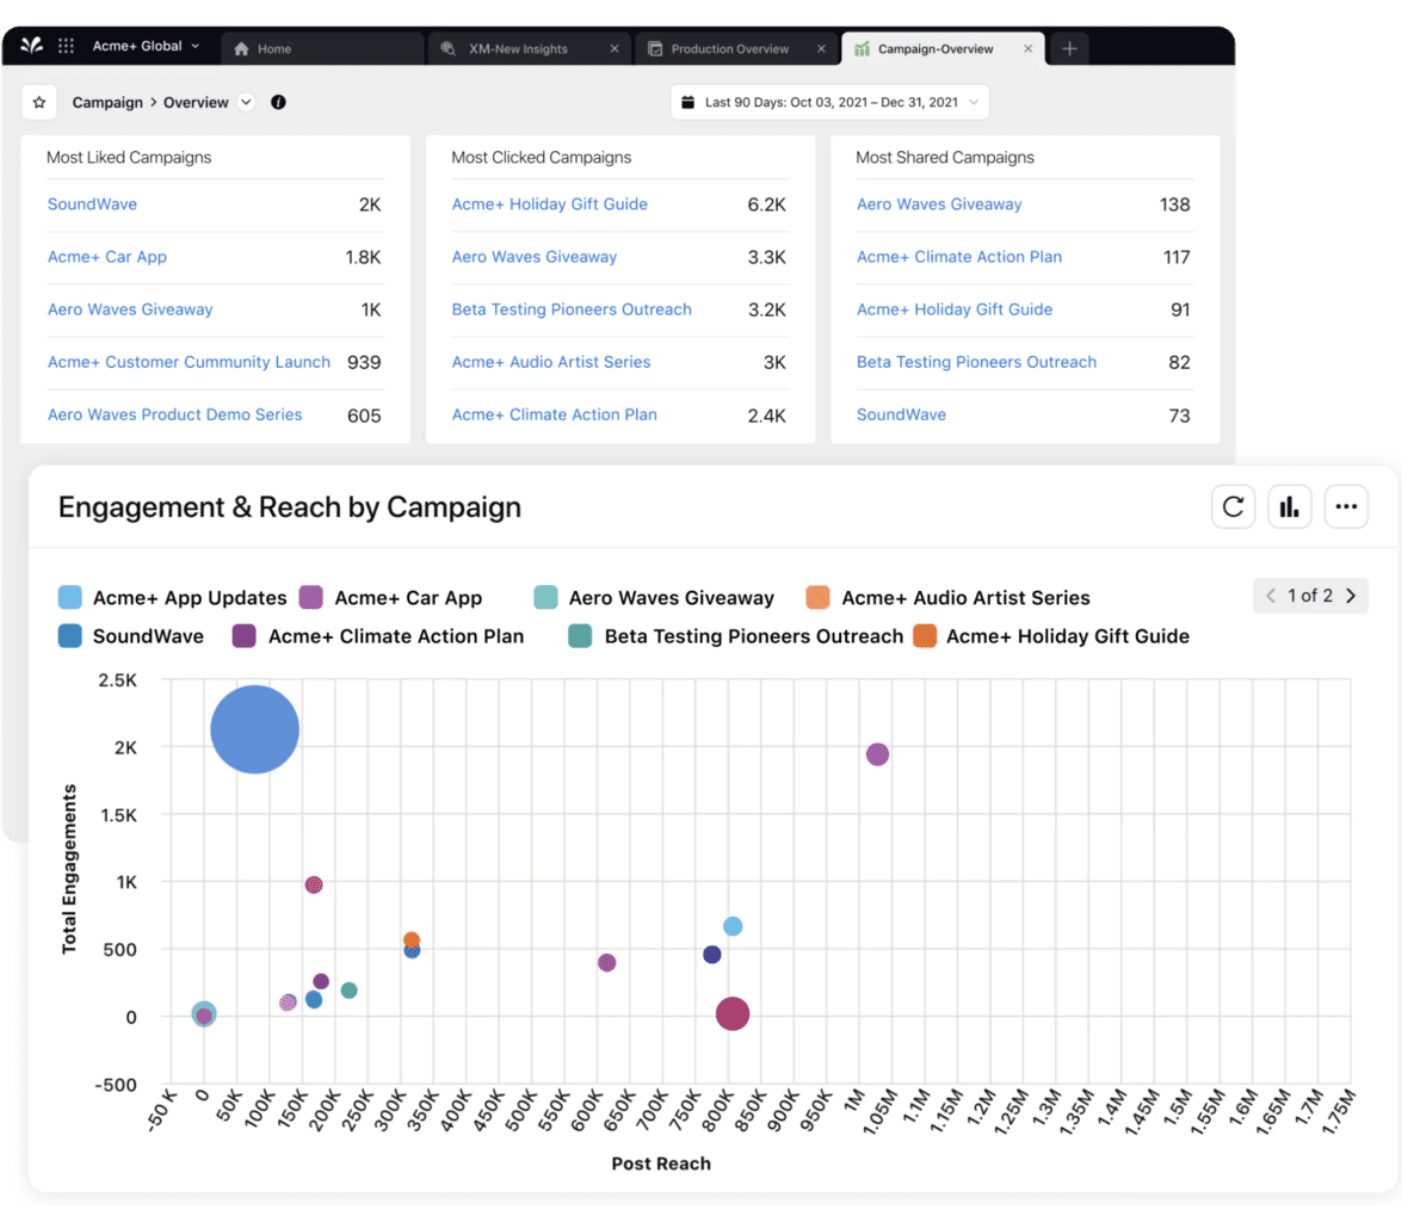 An interactive engagement dashboard showing metrics related to audience engagement on various social platforms